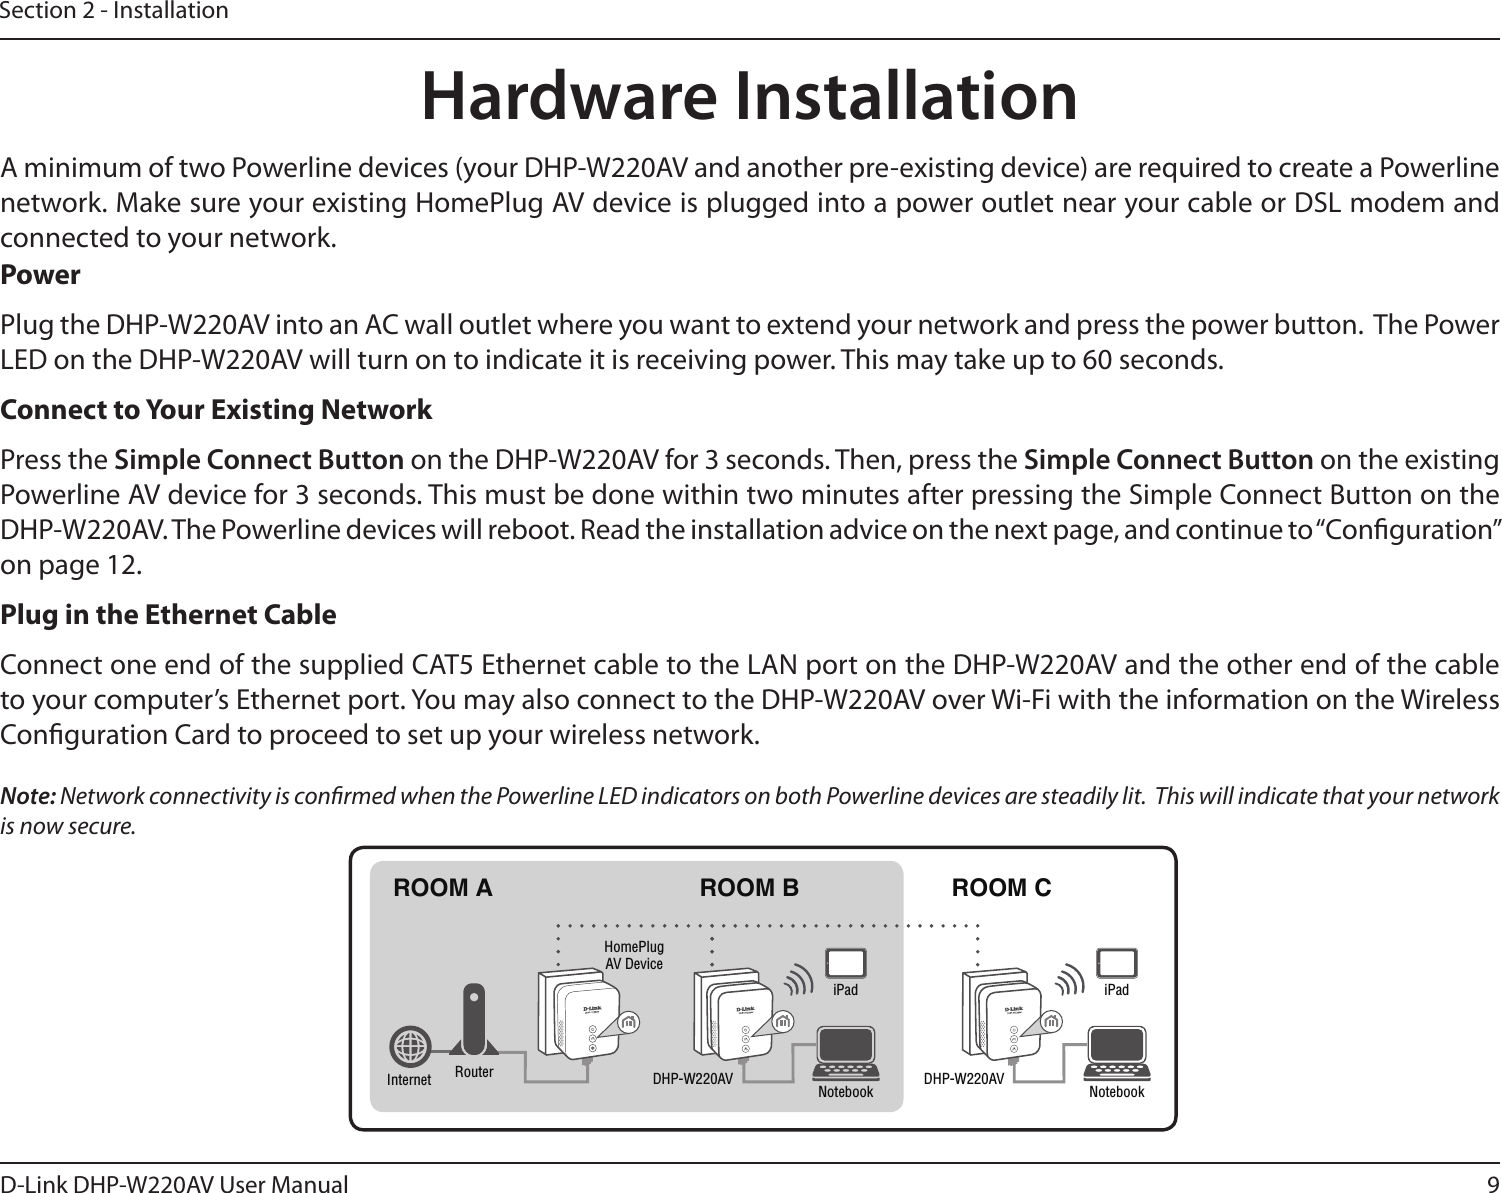 9D-Link DHP-W220AV User ManualSection 2 - InstallationHardware InstallationPowerPlug the DHP-W220AV into an AC wall outlet where you want to extend your network and press the power button.  The Power LED on the DHP-W220AV will turn on to indicate it is receiving power. This may take up to 60 seconds.Connect to Your Existing NetworkPress the Simple Connect Button on the DHP-W220AV for 3 seconds. Then, press the Simple Connect Button on the existing Powerline AV device for 3 seconds. This must be done within two minutes after pressing the Simple Connect Button on the DHP-W220AV. The Powerline devices will reboot. Read the installation advice on the next page, and continue to “Conguration” on page 12.Plug in the Ethernet CableConnect one end of the supplied CAT5 Ethernet cable to the LAN port on the DHP-W220AV and the other end of the cable to your computer’s Ethernet port. You may also connect to the DHP-W220AV over Wi-Fi with the information on the Wireless Conguration Card to proceed to set up your wireless network.Note: Network connectivity is conrmed when the Powerline LED indicators on both Powerline devices are steadily lit.  This will indicate that your network is now secure.A minimum of two Powerline devices (your DHP-W220AV and another pre-existing device) are required to create a Powerline network. Make sure your existing HomePlug AV device is plugged into a power outlet near your cable or DSL modem and connected to your network.ROOM A ROOM B ROOM CDHP-W220AV DHP-W220AVHomePlug AV DeviceRouterInternet Notebook NotebookiPad iPad